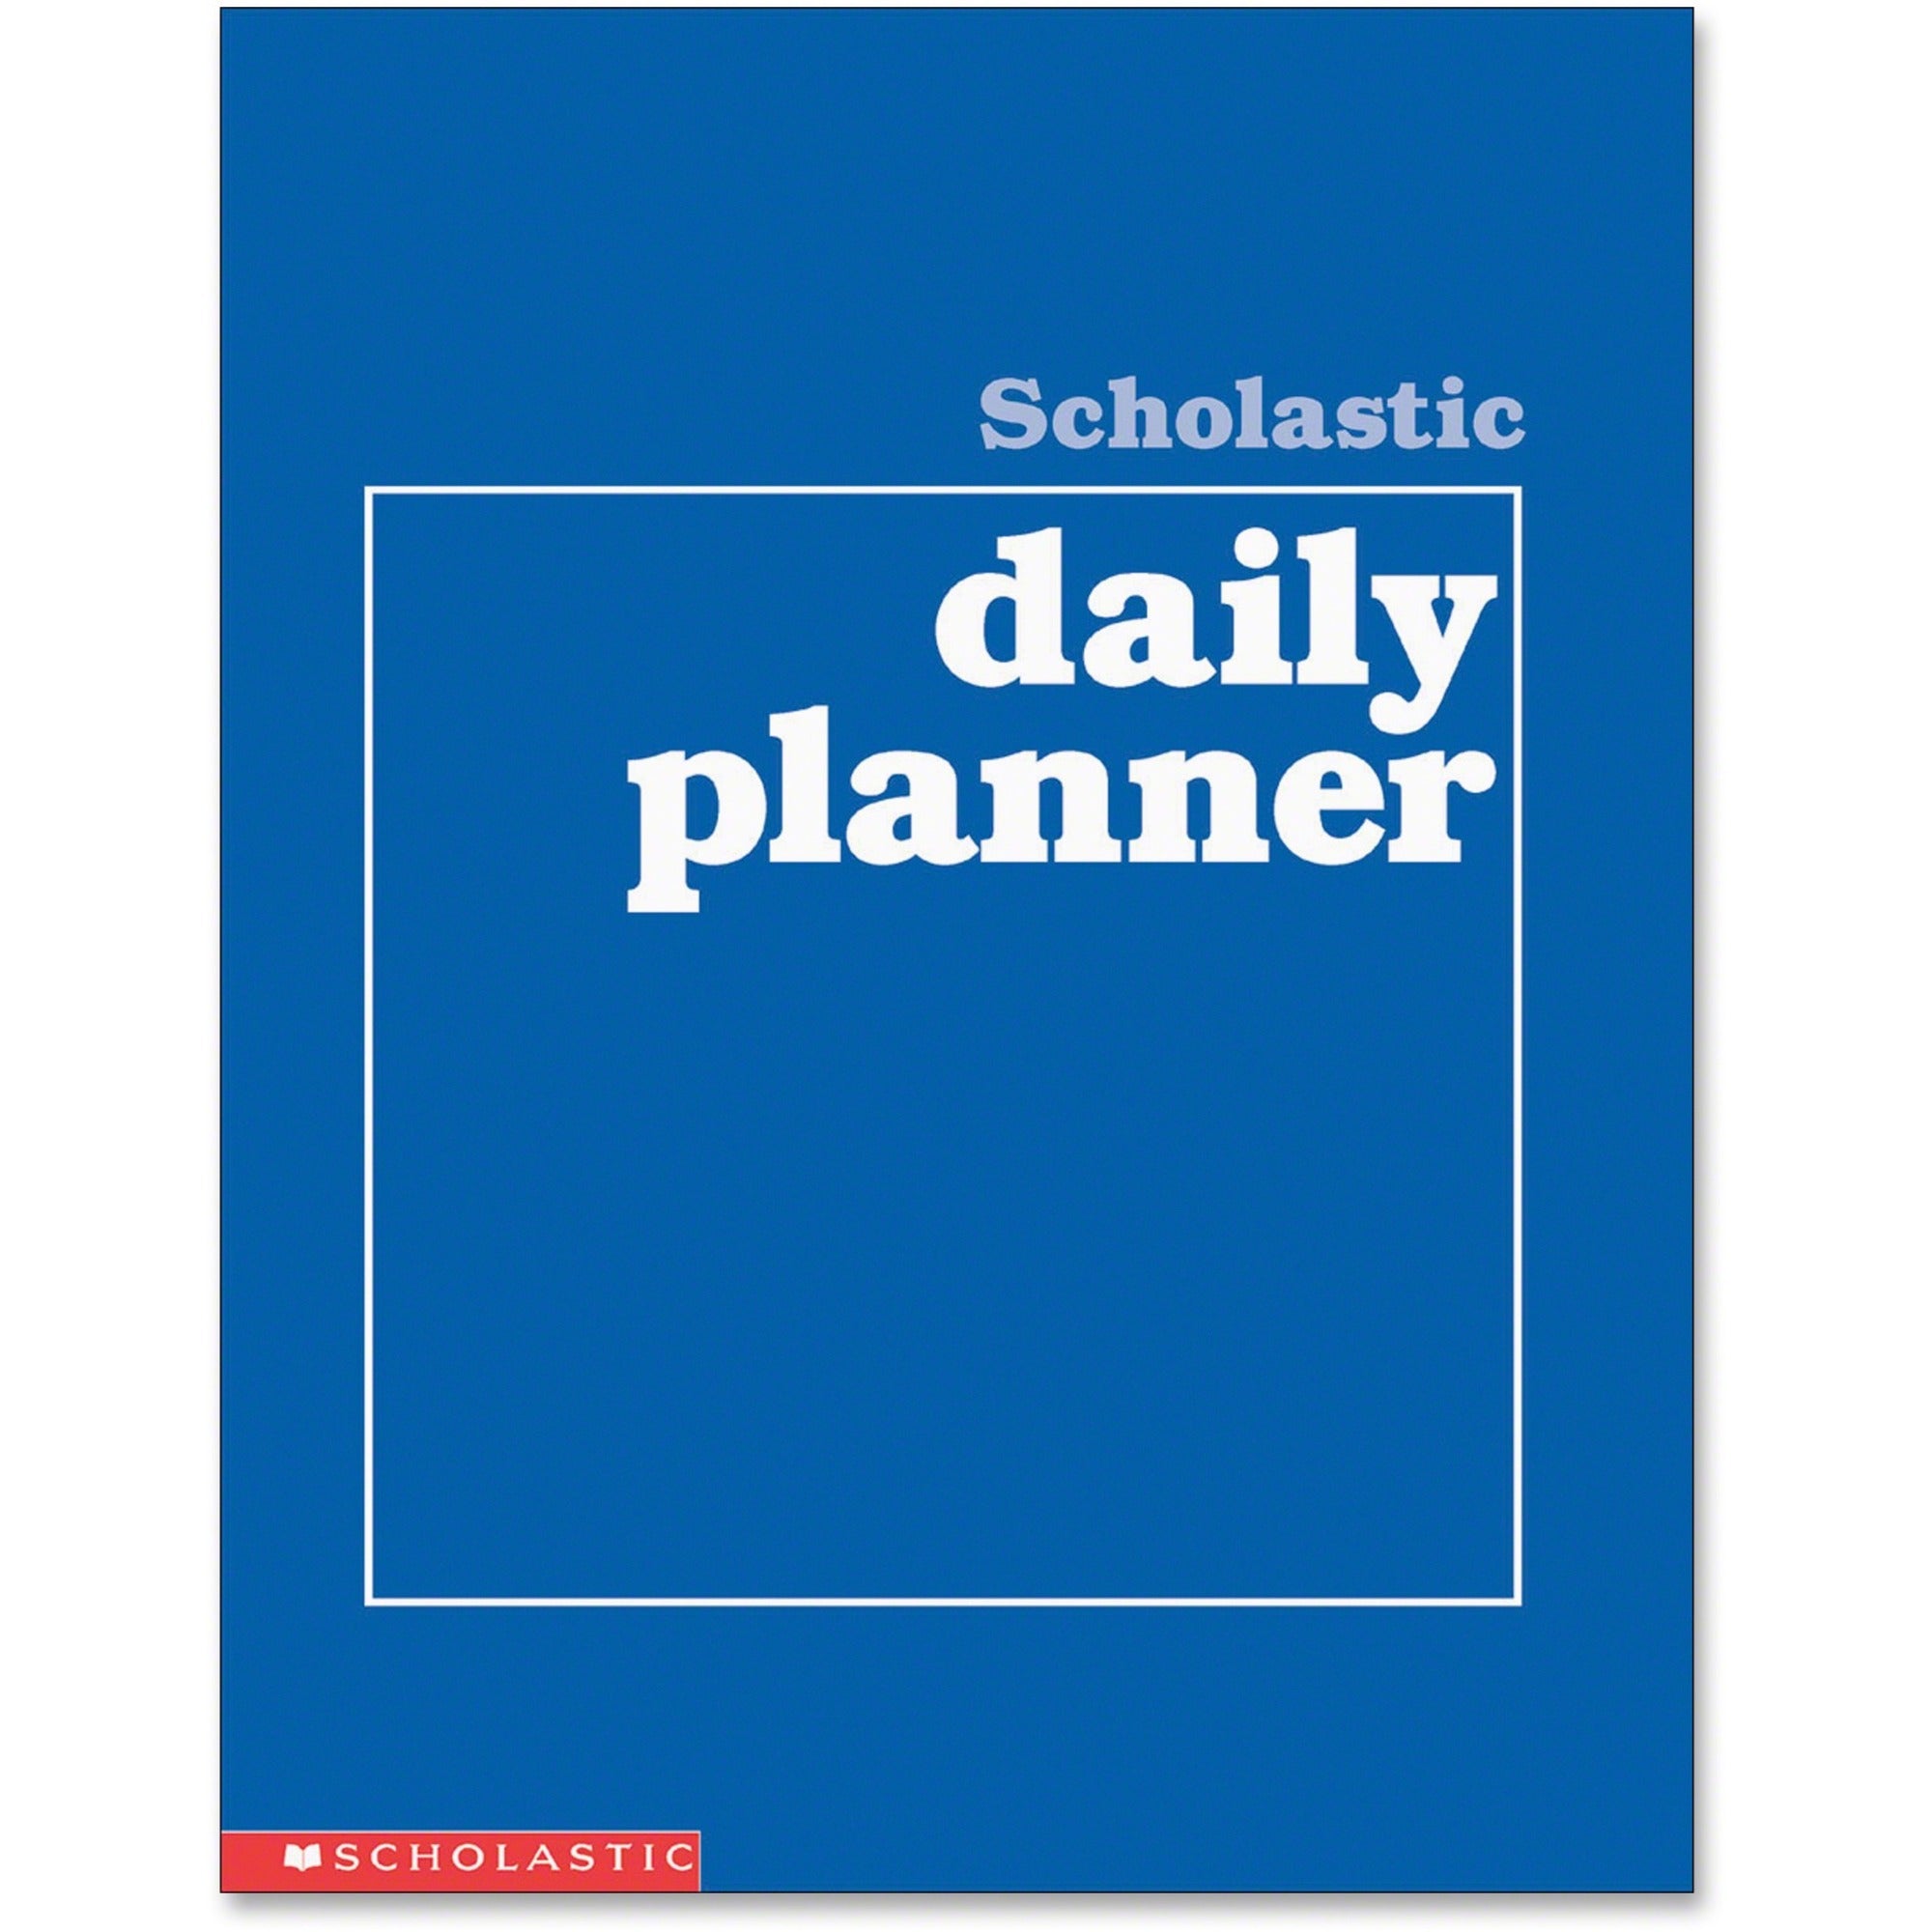 Scholastic Daily Planner - Academic - Daily, Weekly, Yearly - 8 1/2" x 11" White Sheet - Blue CoverClass Schedule - 1 Each - 